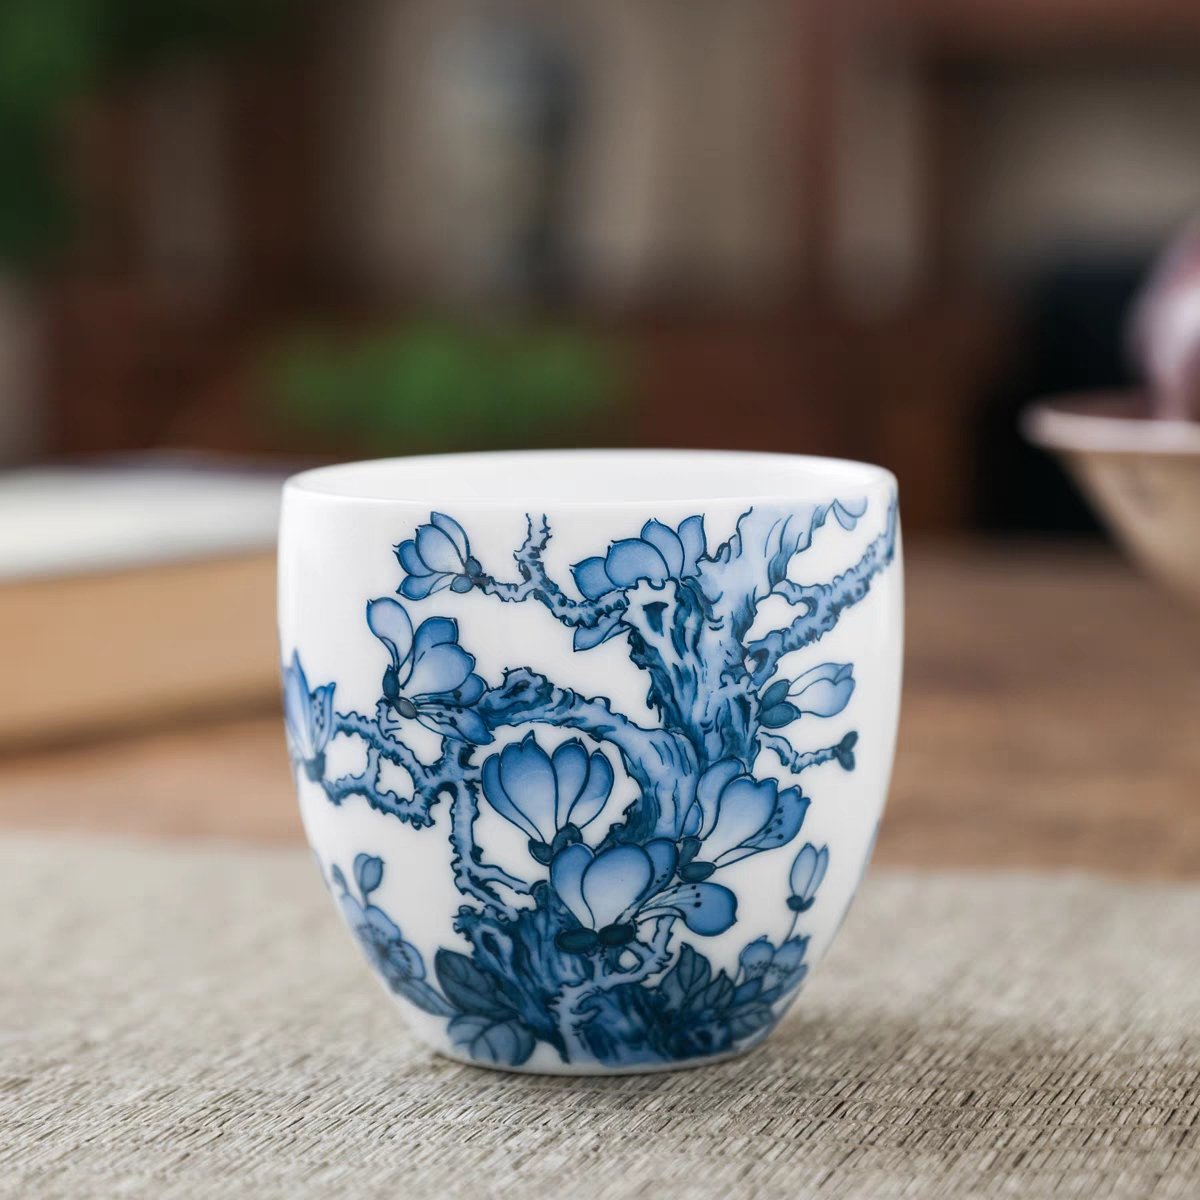 Crafted from stunning white jade porcelain, every sip will be an adventure in flavor and style. Who knew tea time could be so thrilling?

#teagamestrong #teaobsessed #teatray #teawareforsale 
#茶碗 #抹茶茶碗 #茶道 #中国茶 #器物之美 #手繪 #茶生
#도자기 #용곡예가 #조재호 #말차